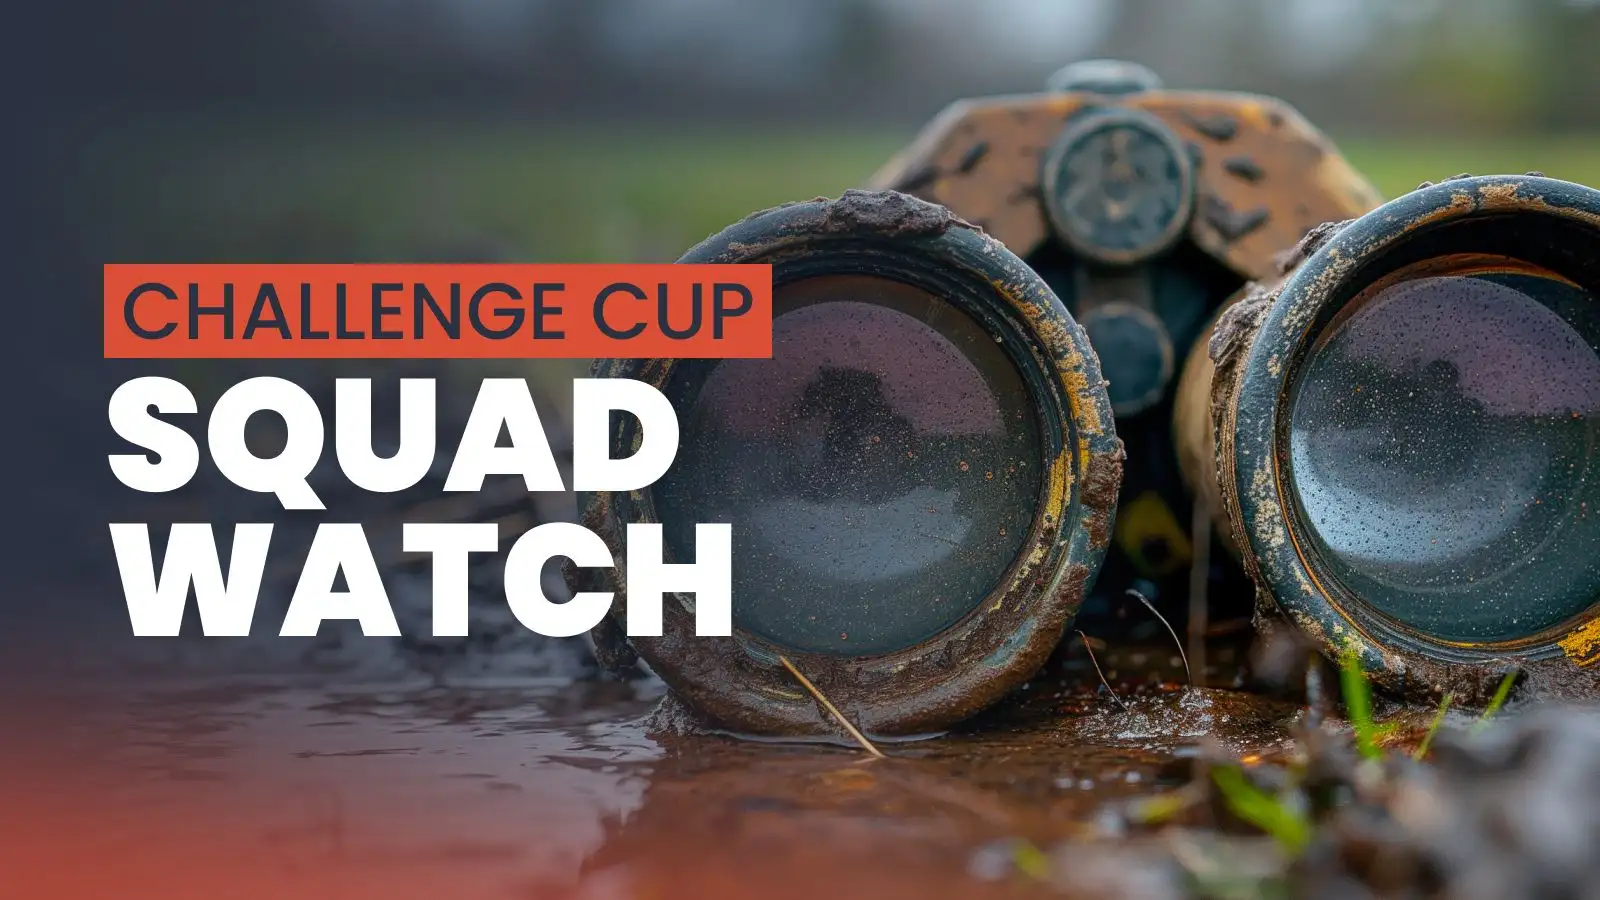 Squad watch: Challenge Cup team news, including broadcast details and kick-off times